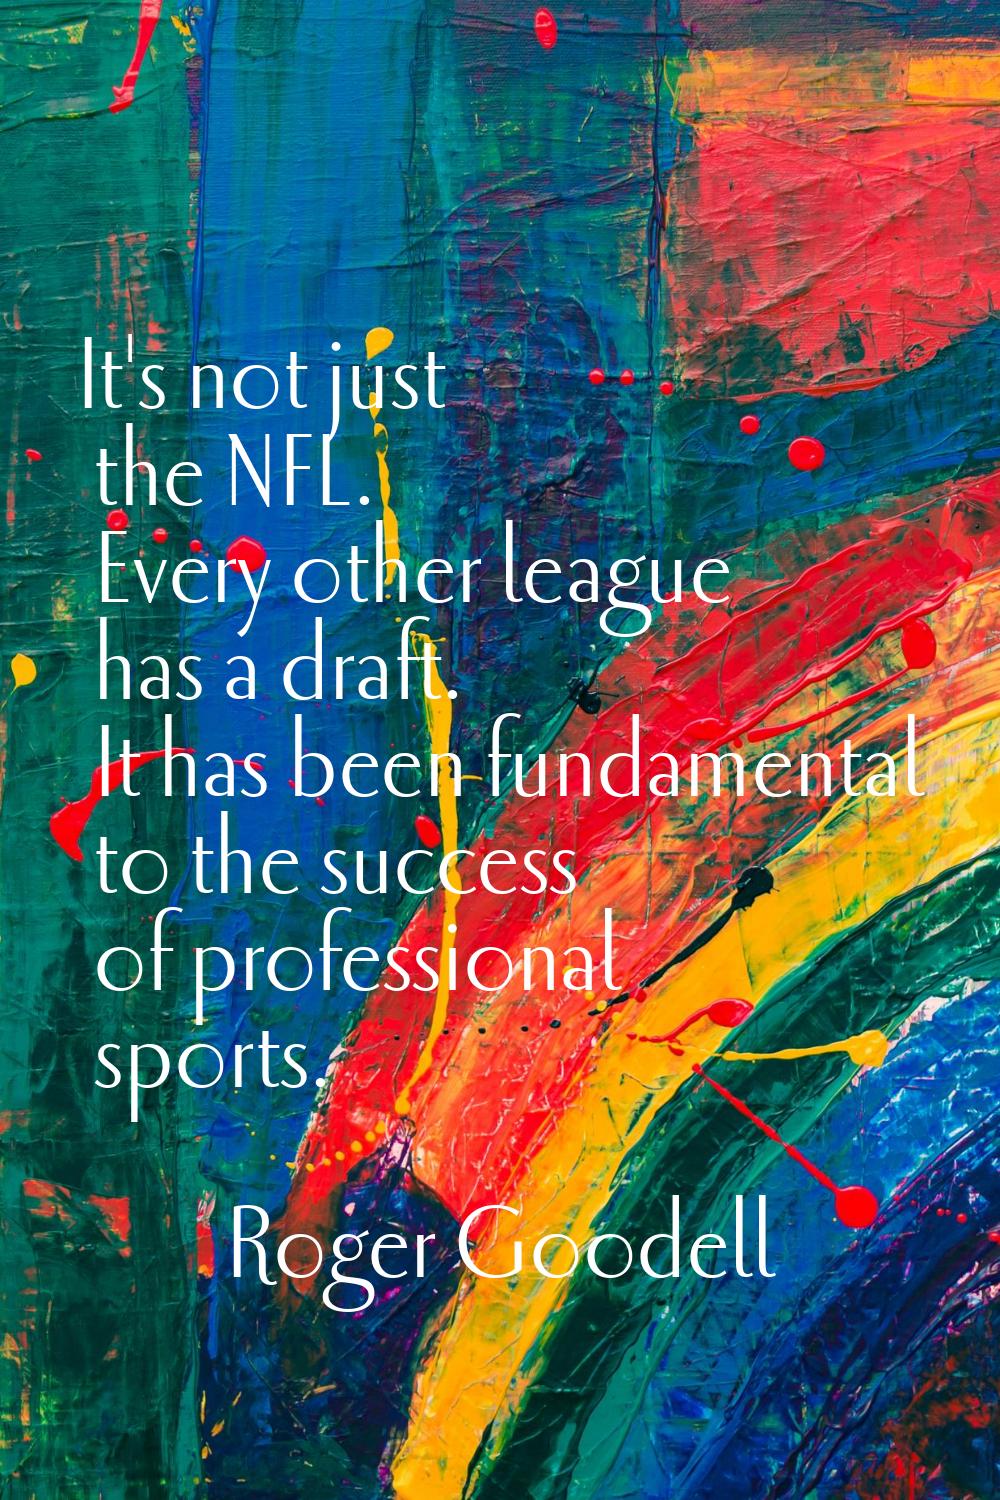 It's not just the NFL. Every other league has a draft. It has been fundamental to the success of pr